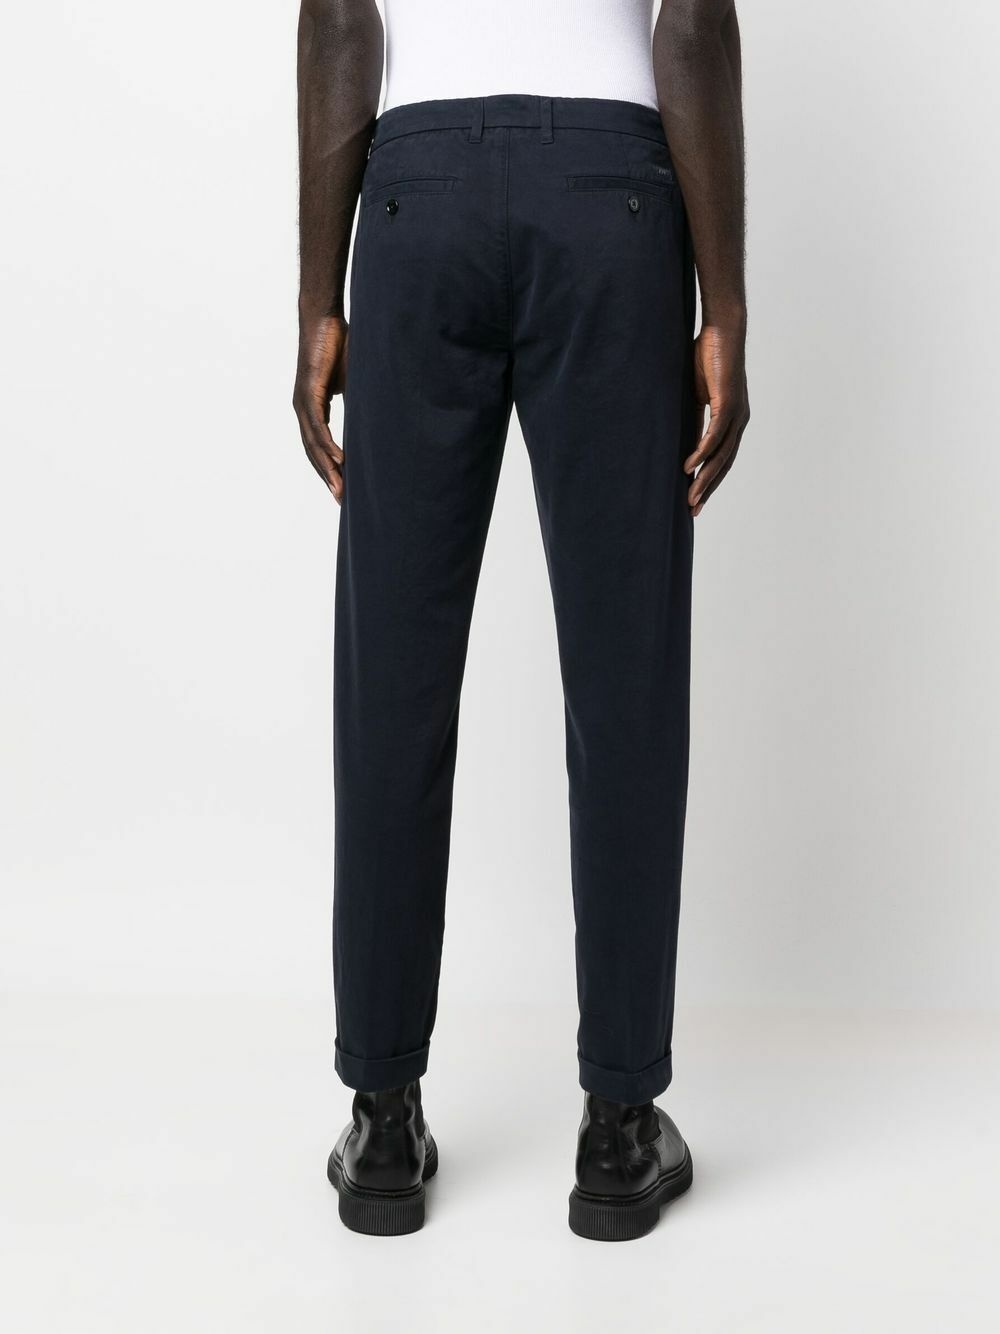 FAY - Cotton Trousers